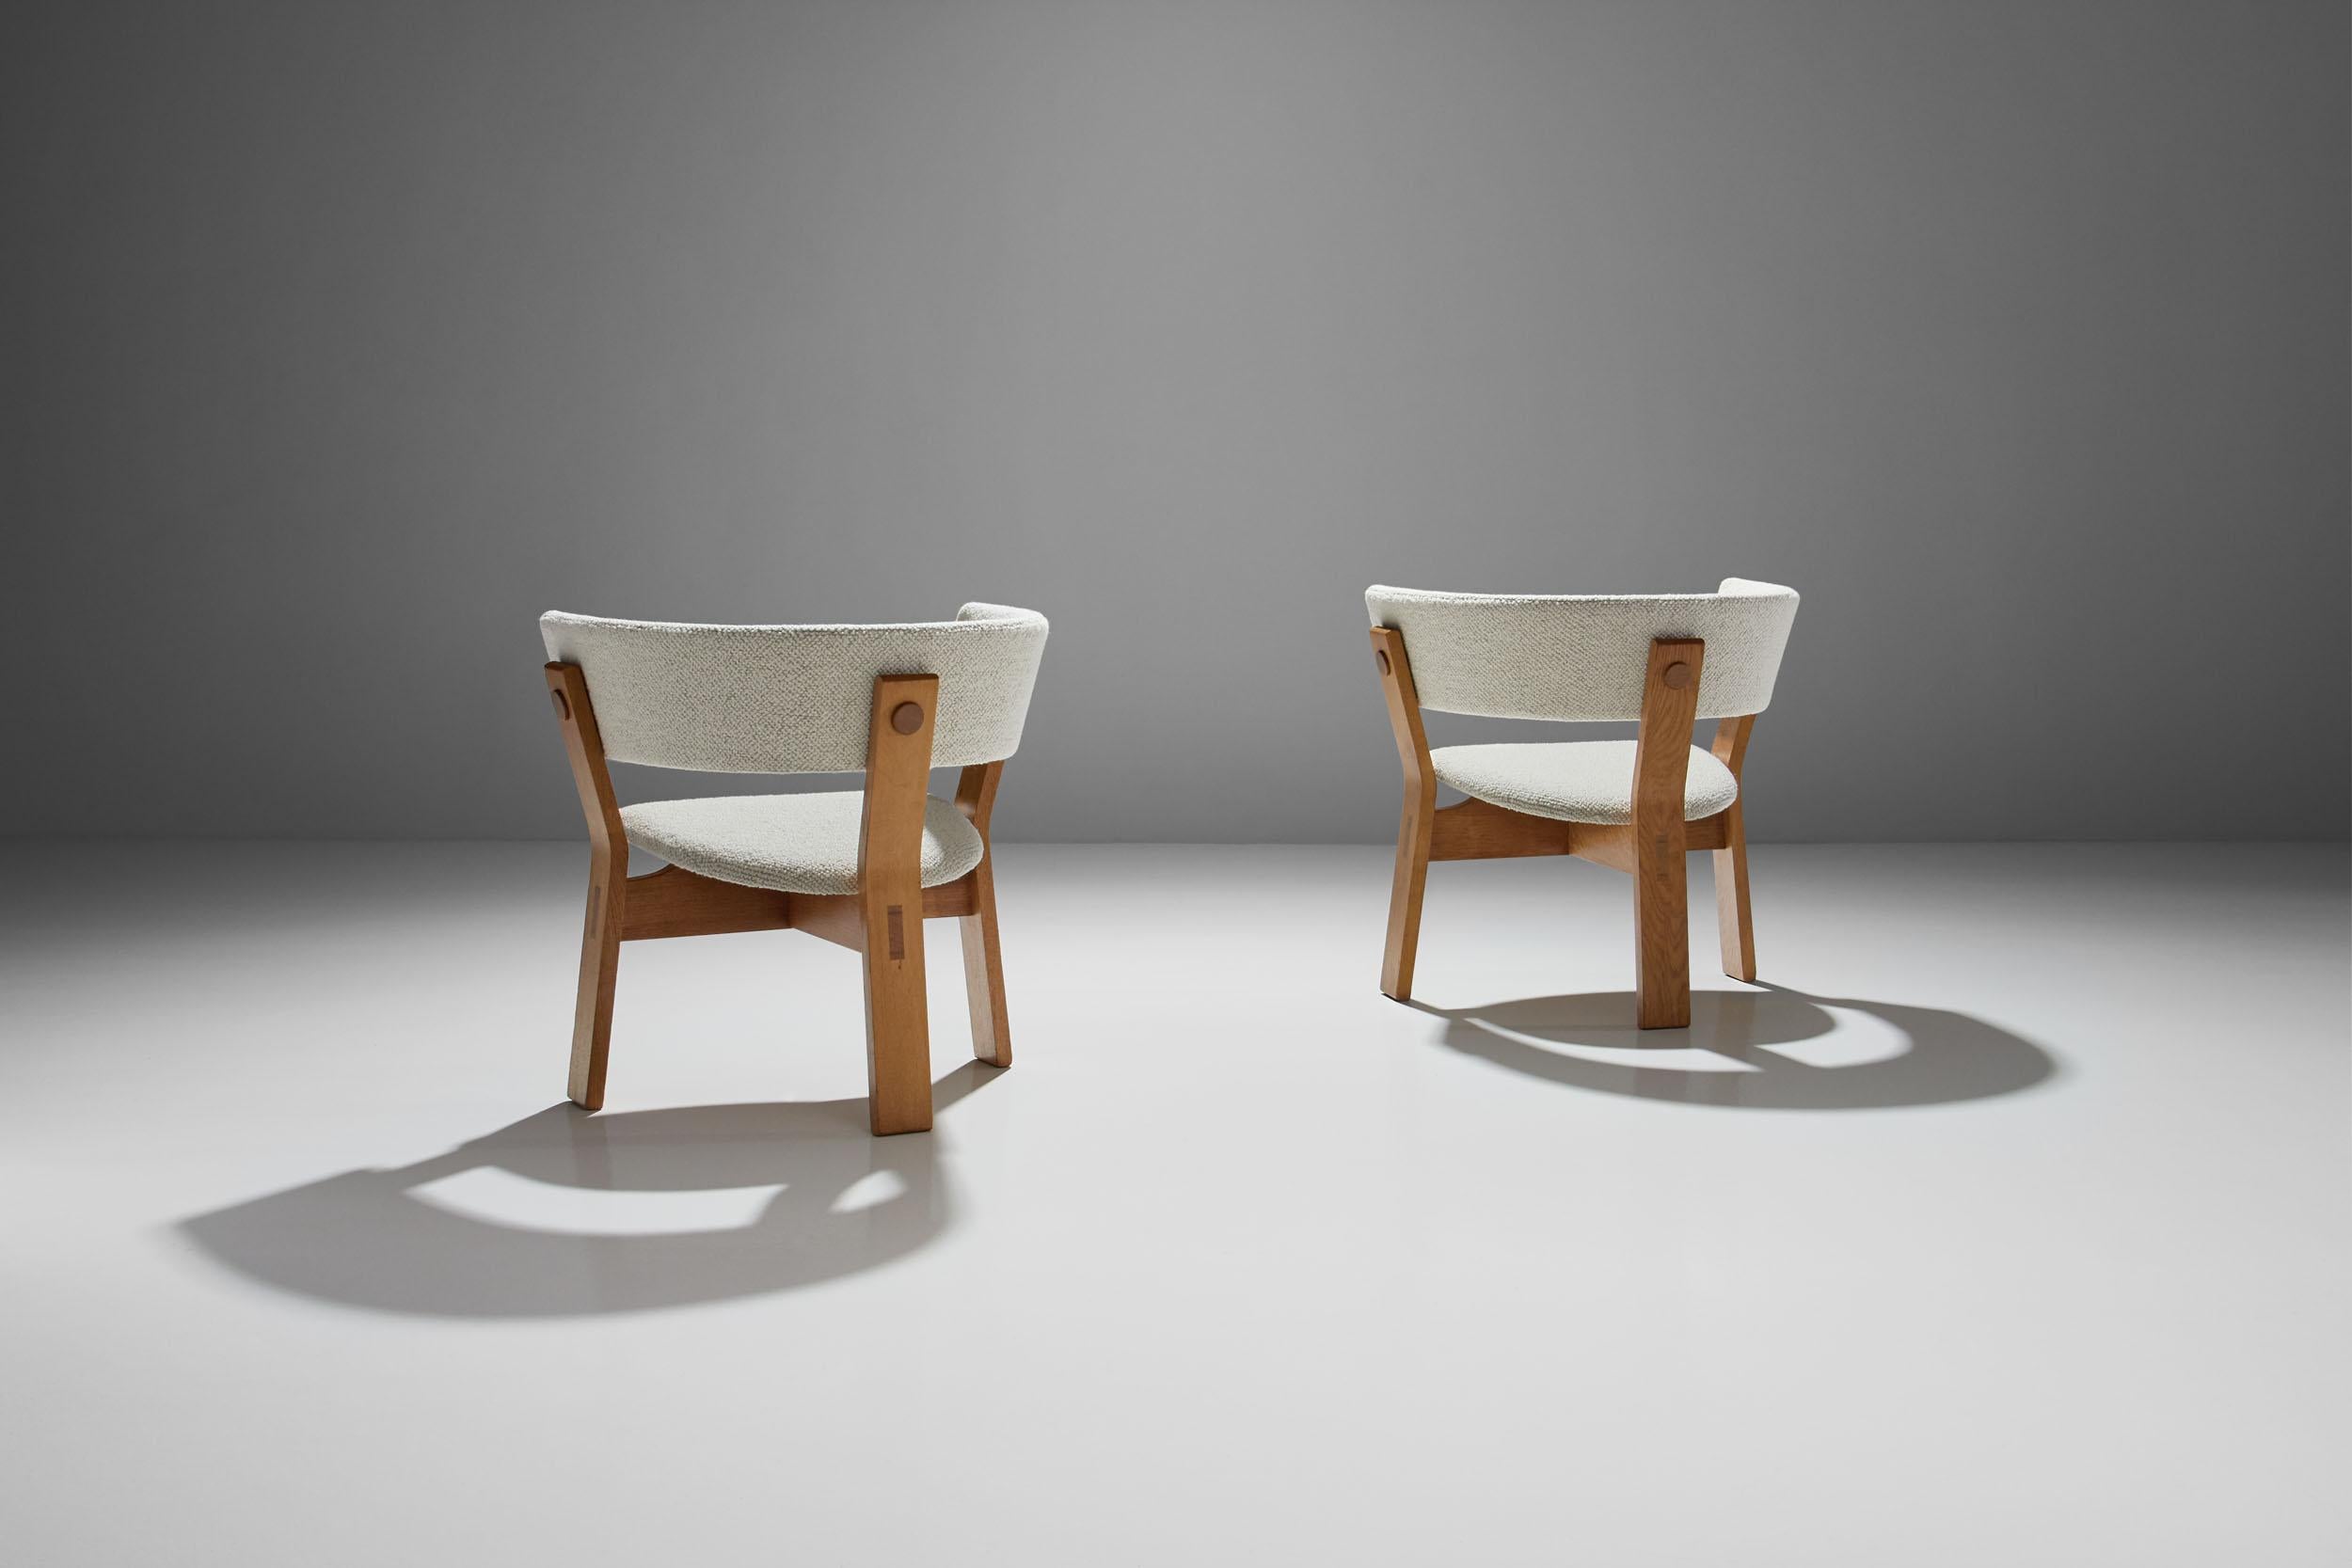 Pair of oak armchairs designed by Steen Østergaard, manufactured by Stol-Ex., Denmark, 1962

This pair of oak armchairs where designed for the Danish Television “TV-Huset” by Steen Østergaard in 1962 and reflect the Danish aesthetic for refined